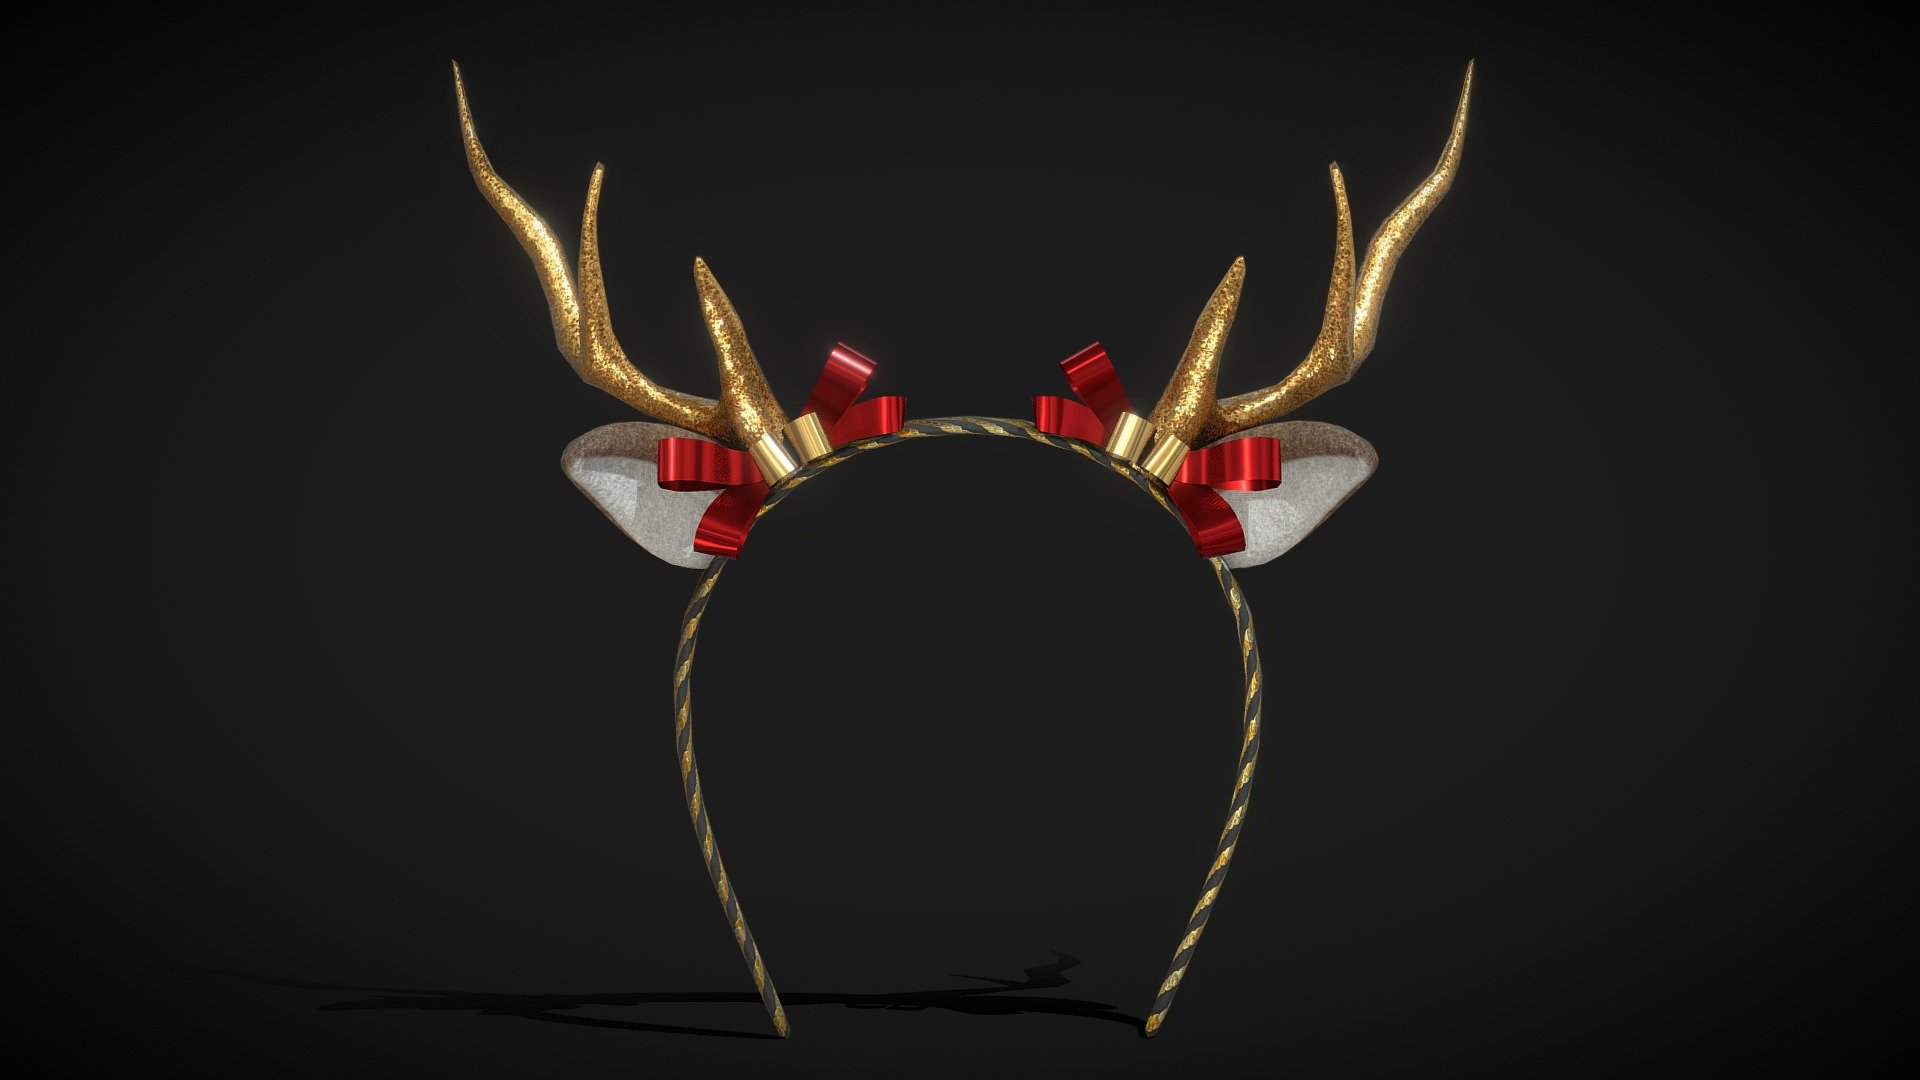 Christmas Deer Ear Headband - low poly model

Triangles: 3.2k
Vertices: 1.9k

4096x4096 PNG texture

Commercial use*

My models cannot be included in an asset pack or sold at any sort of asset/resource marketplace 3d model